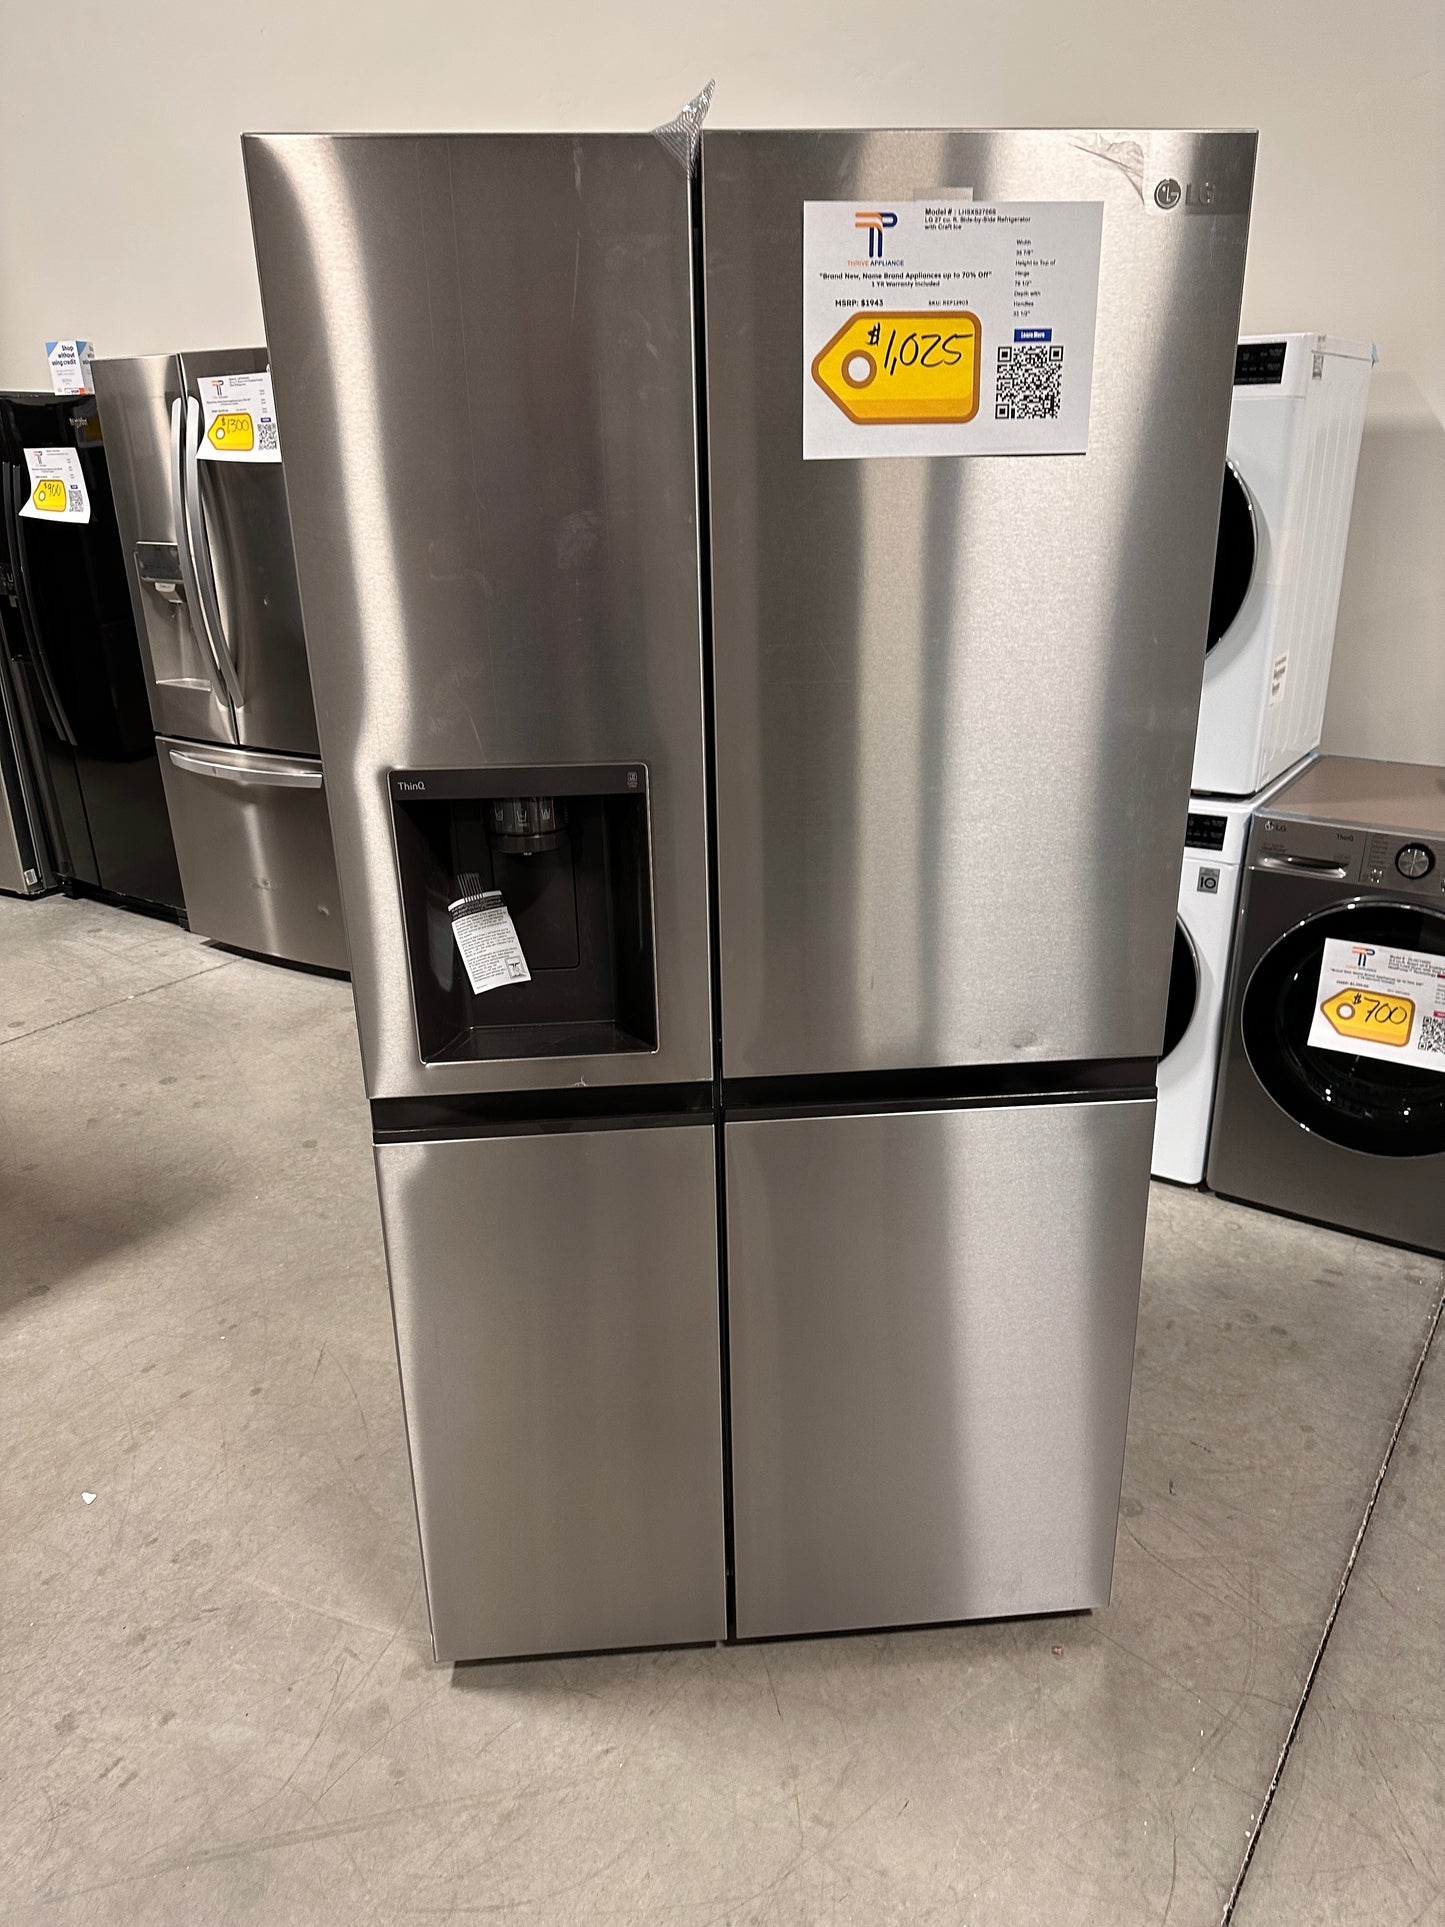 NEW SIDE-BY-SIDE REFRIGERATOR with SPACEPLUS ICE Model:LRSXS2706S  REF12903